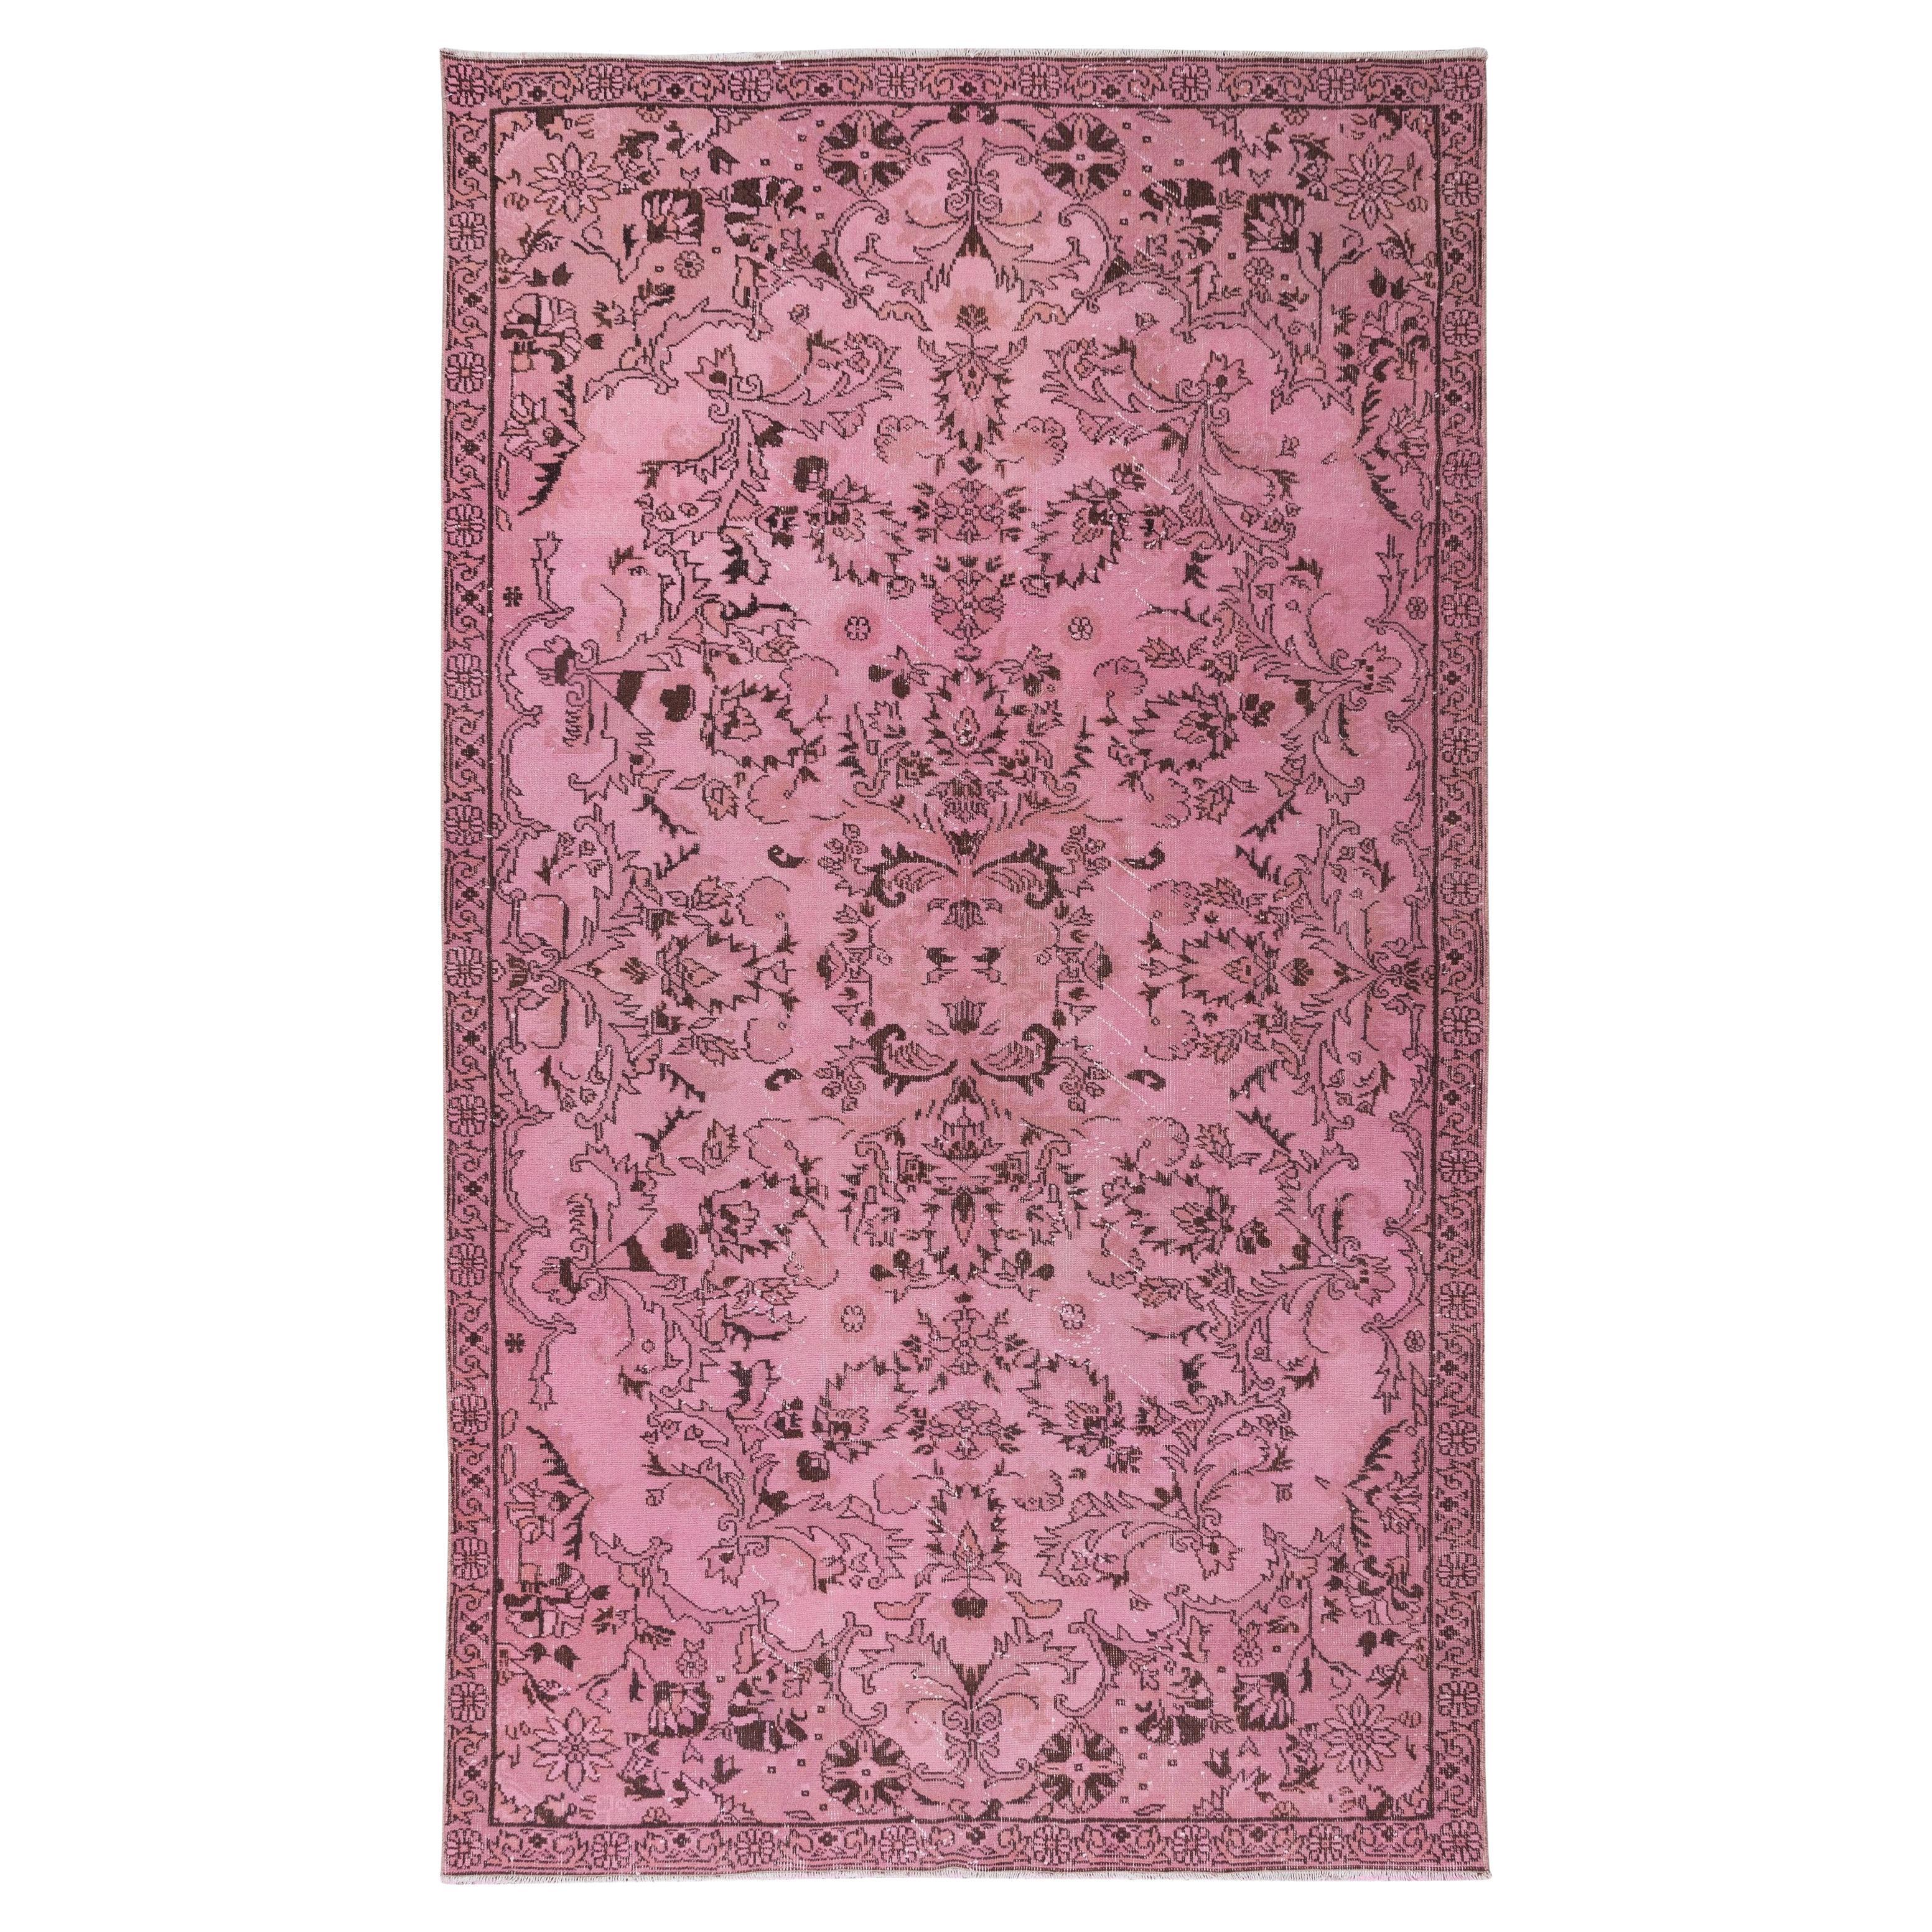 Handmade Anatolian Vintage Wool Rug in Pink with Floral Garden Design For Sale